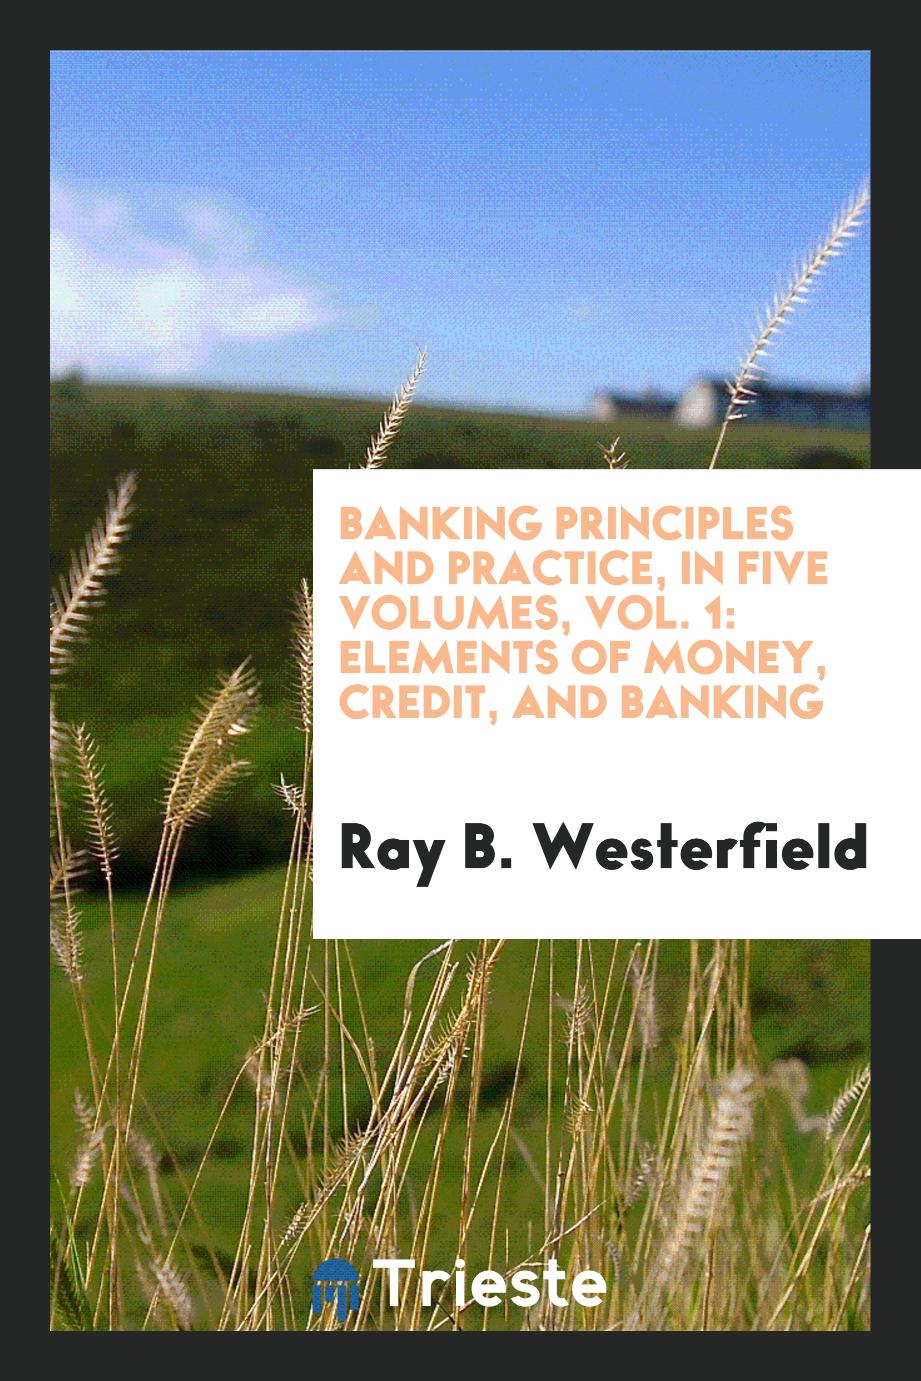 Banking principles and practice, in five volumes, Vol. 1: Elements of money, credit, and banking